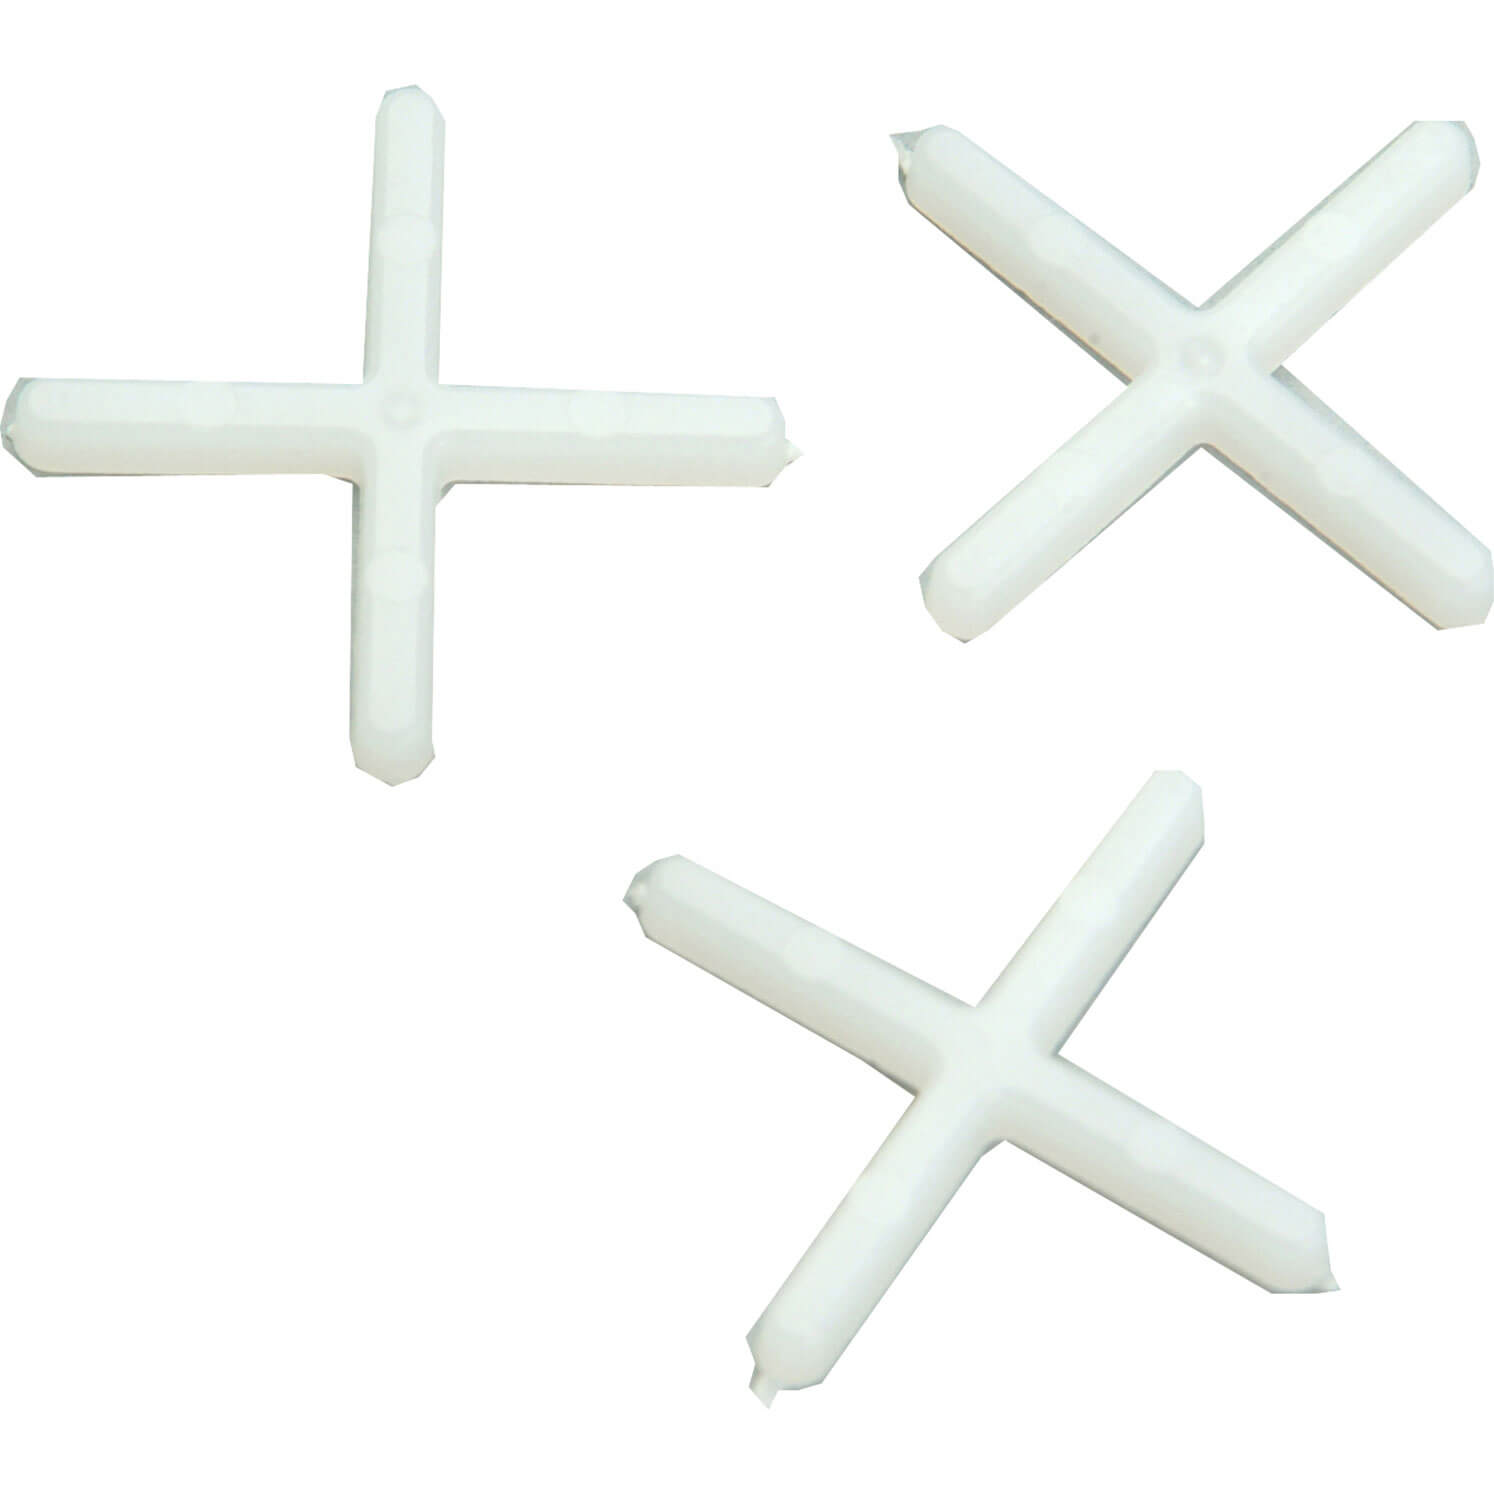 Vitrex 10 2252 Wall Tile Spacers 2.5mm Pack of 500